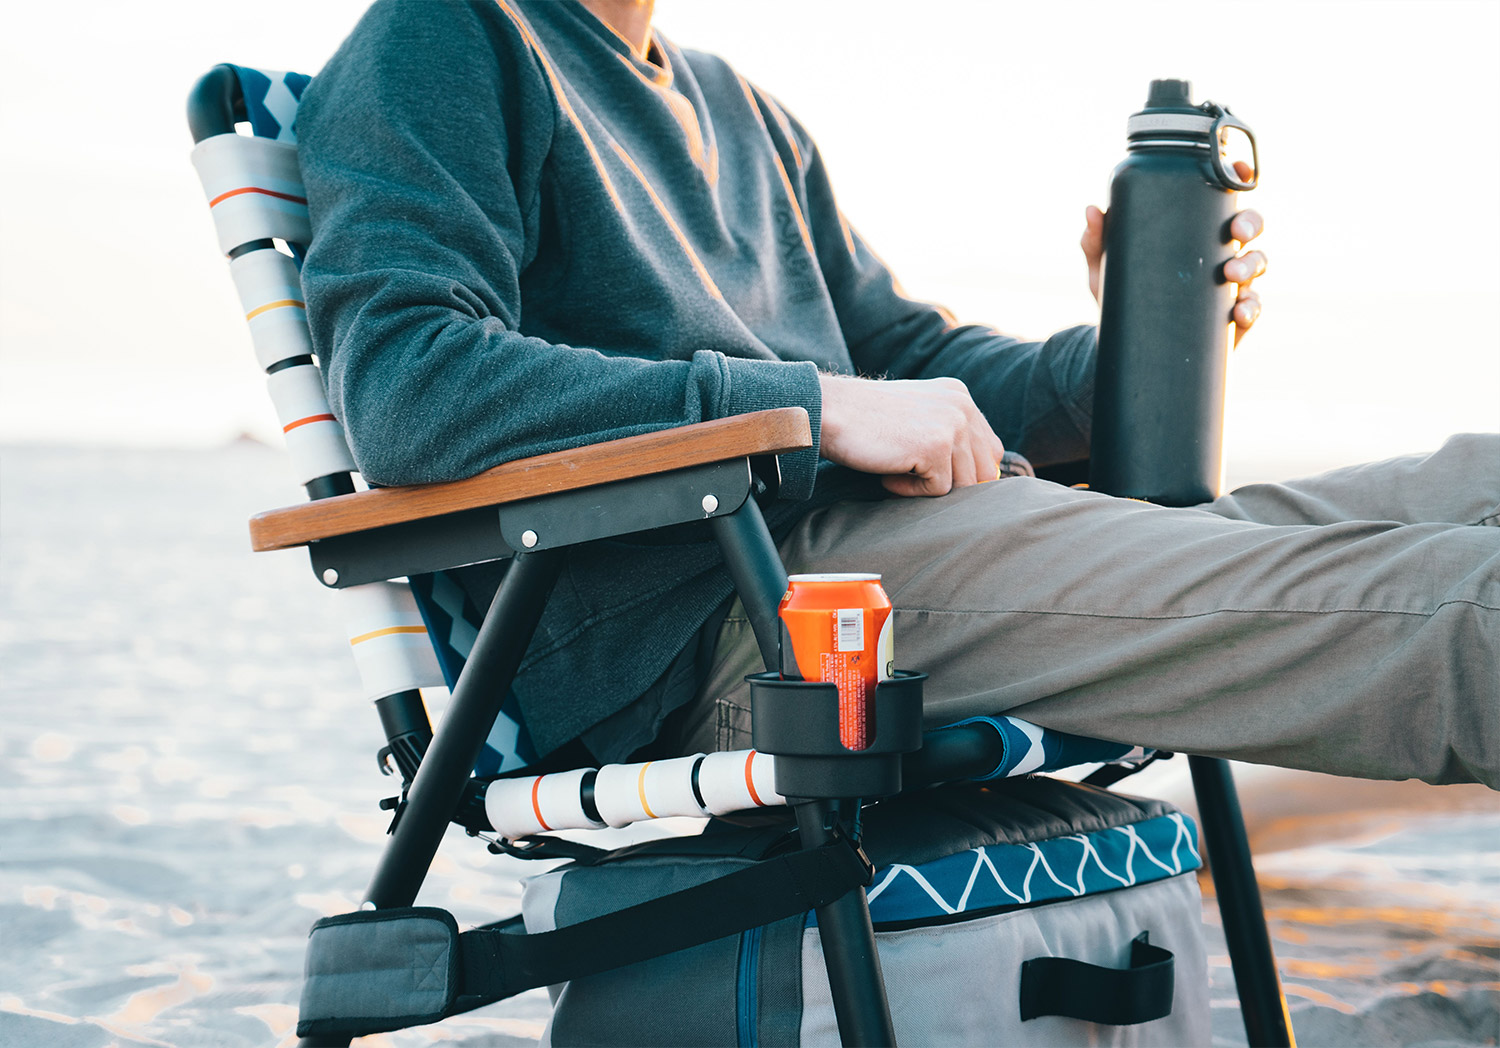 Parkit Voyager Is a 3-in-1 Lawn Chair, Cooler, And Backpack - Adventure folding lawn chair